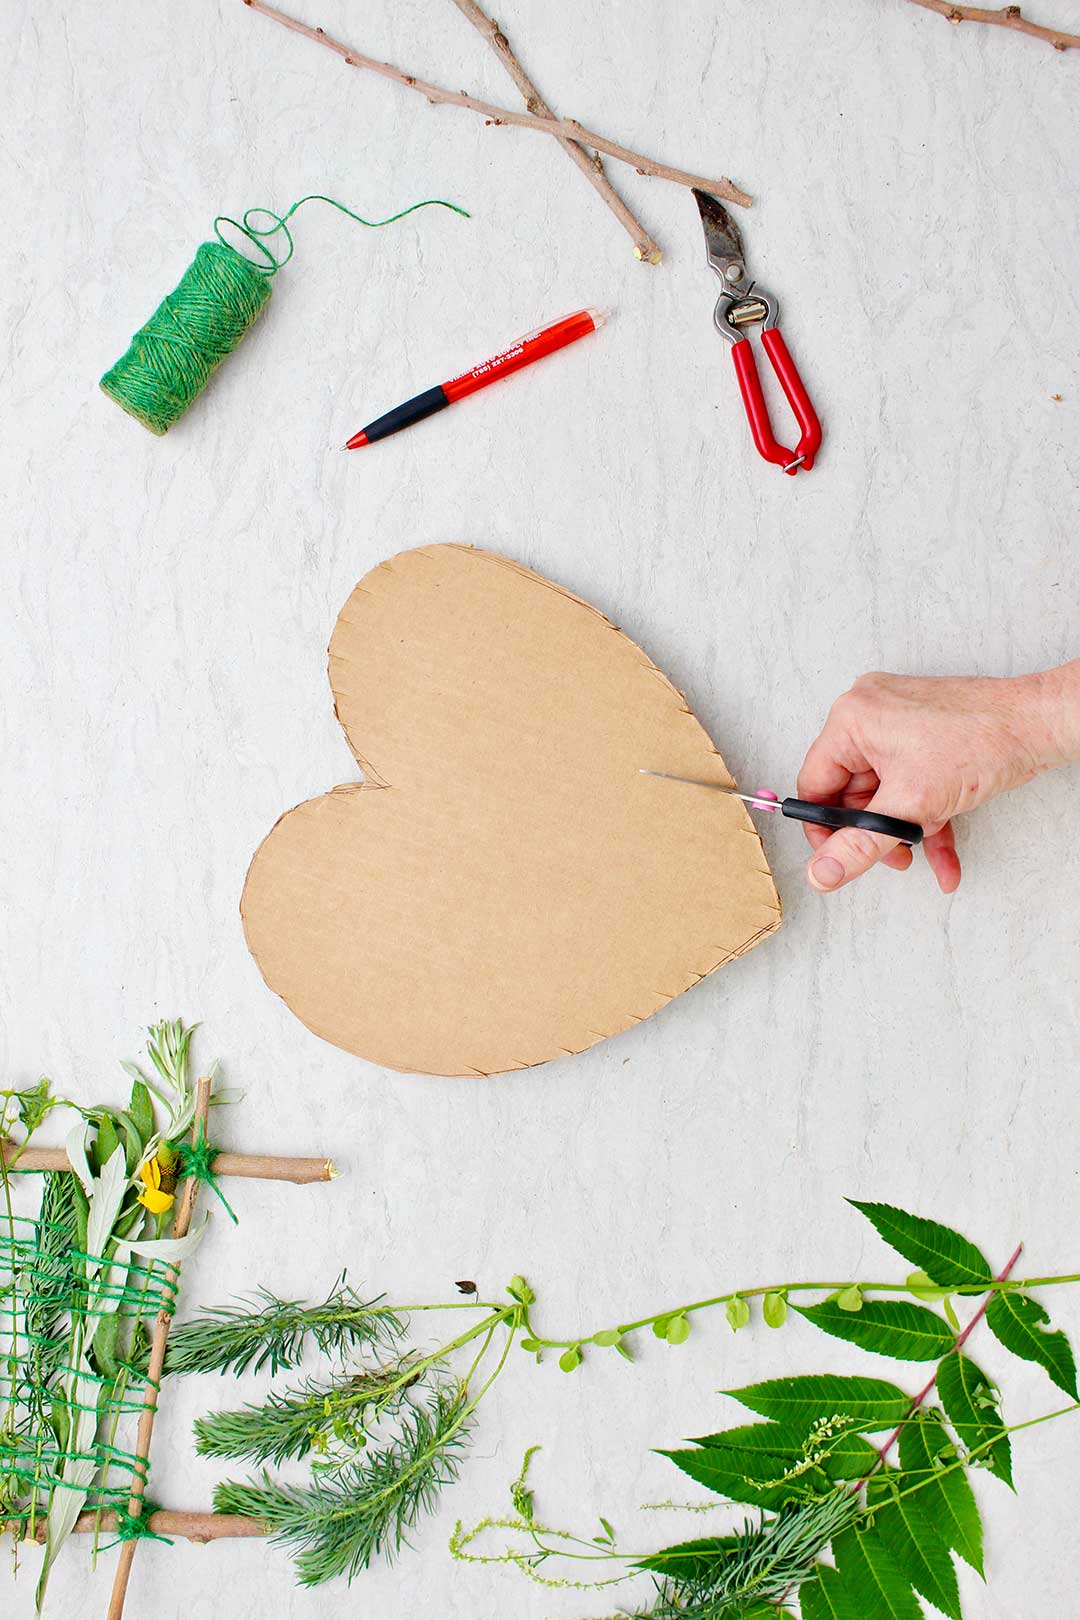 Hand cutting notches in heart shaped cardboard with supplies near by.